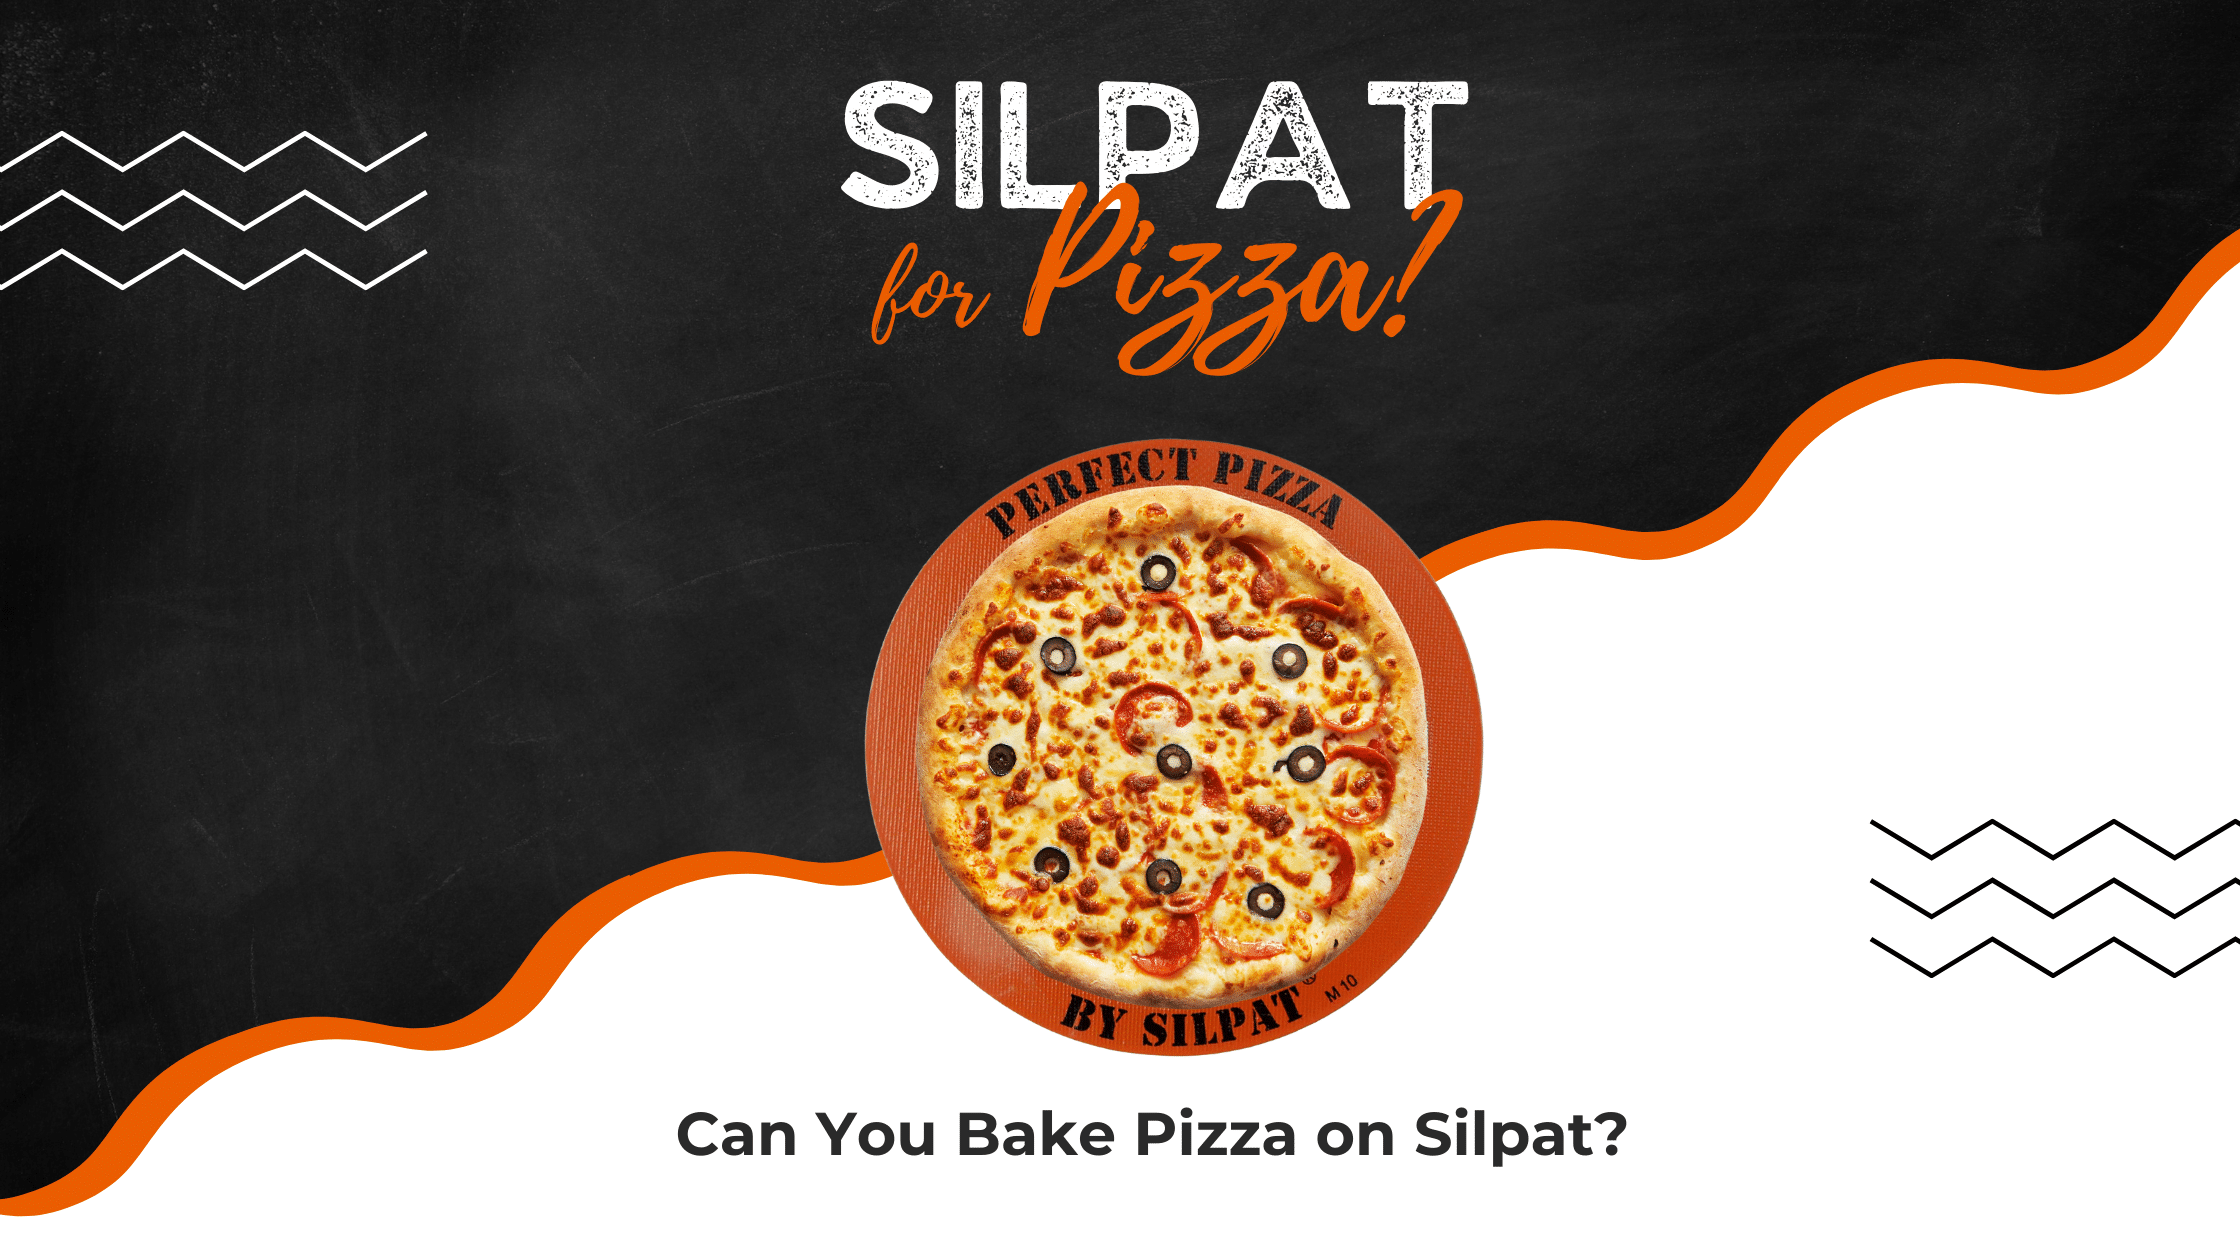 Can You Bake Pizza on Silpat? Yes, You Can! Here’s What You Need to Know